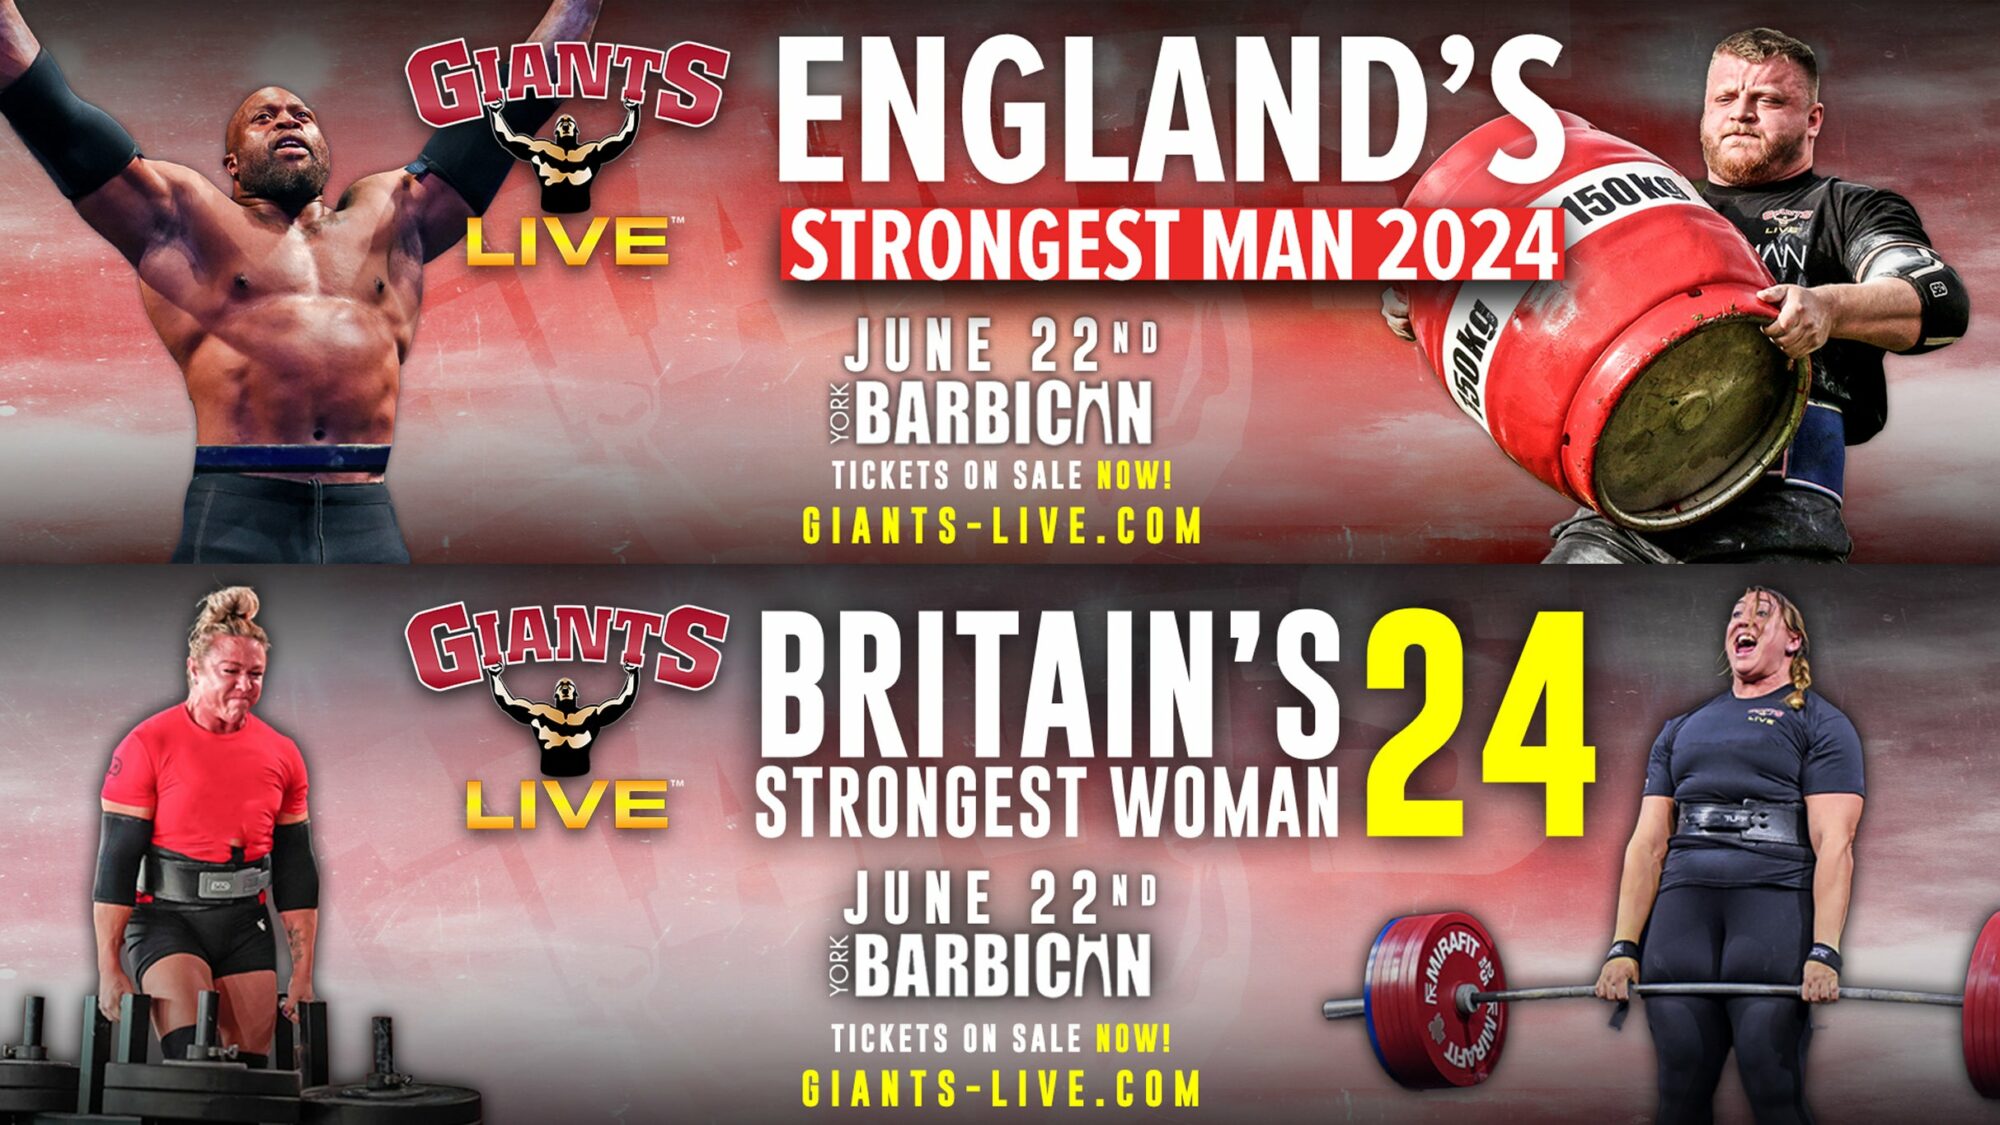 Image name Englands Strongest Man Britains Strongest Woman All Day Ticket at York Barbican York the 15 image from the post England's Strongest Man & Britain's Strongest Woman - All Day Ticket at York Barbican, York in Yorkshire.com.